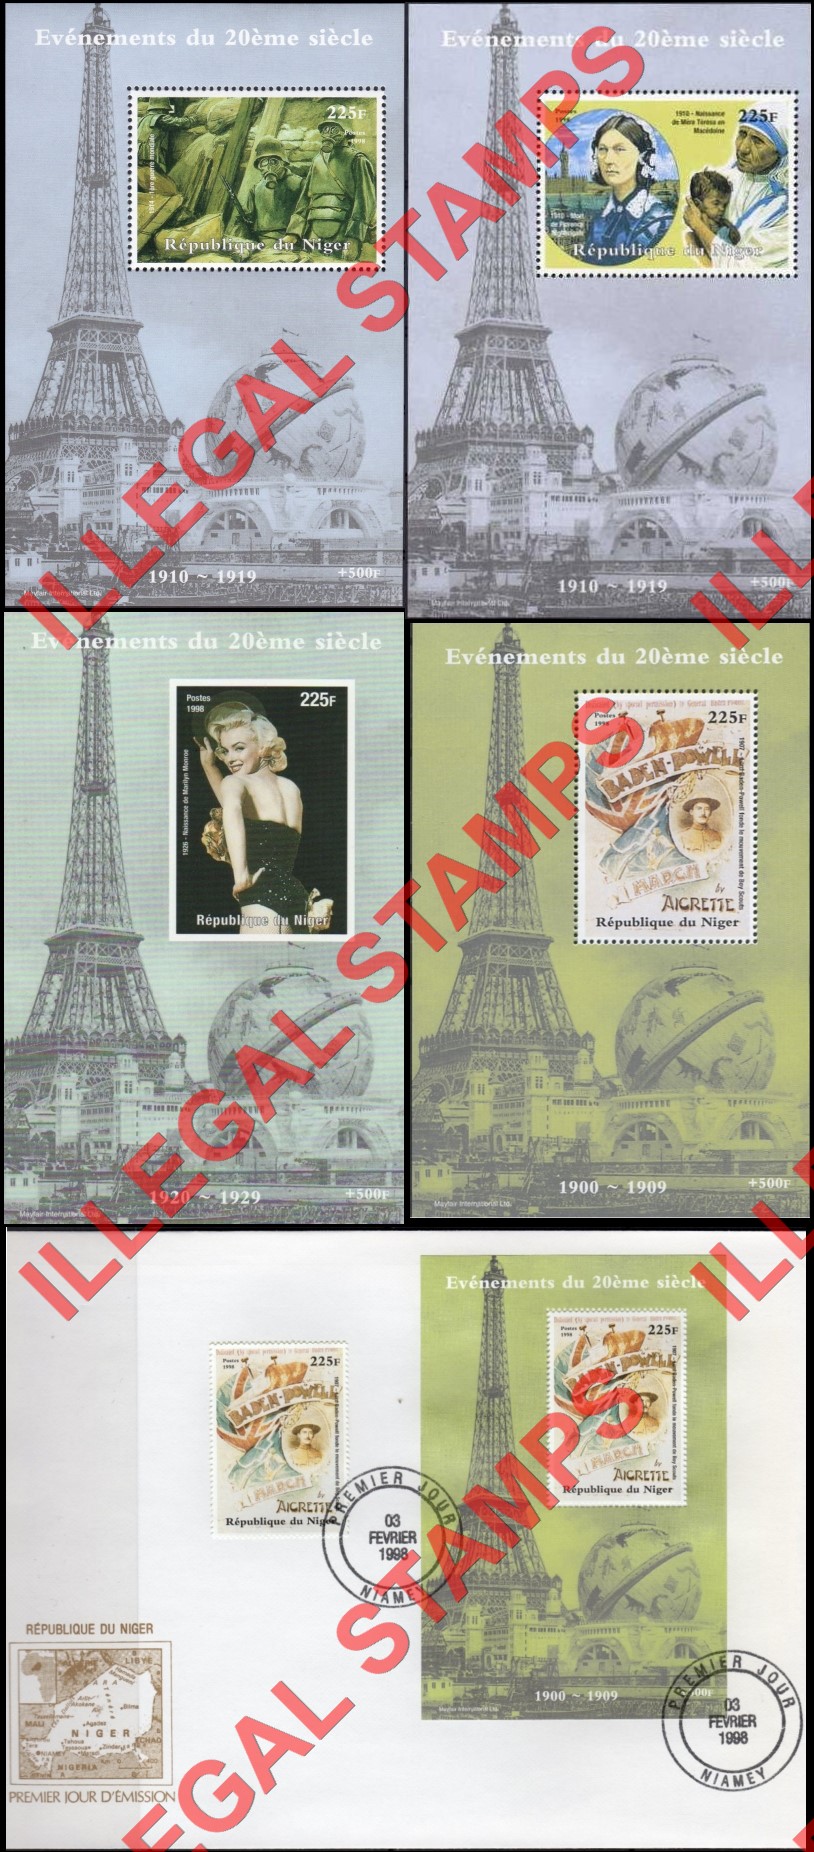 Niger 1998 Events of the 20th Century 225F Illegal Stamp Souvenir Sheets of 1 (Part 3)